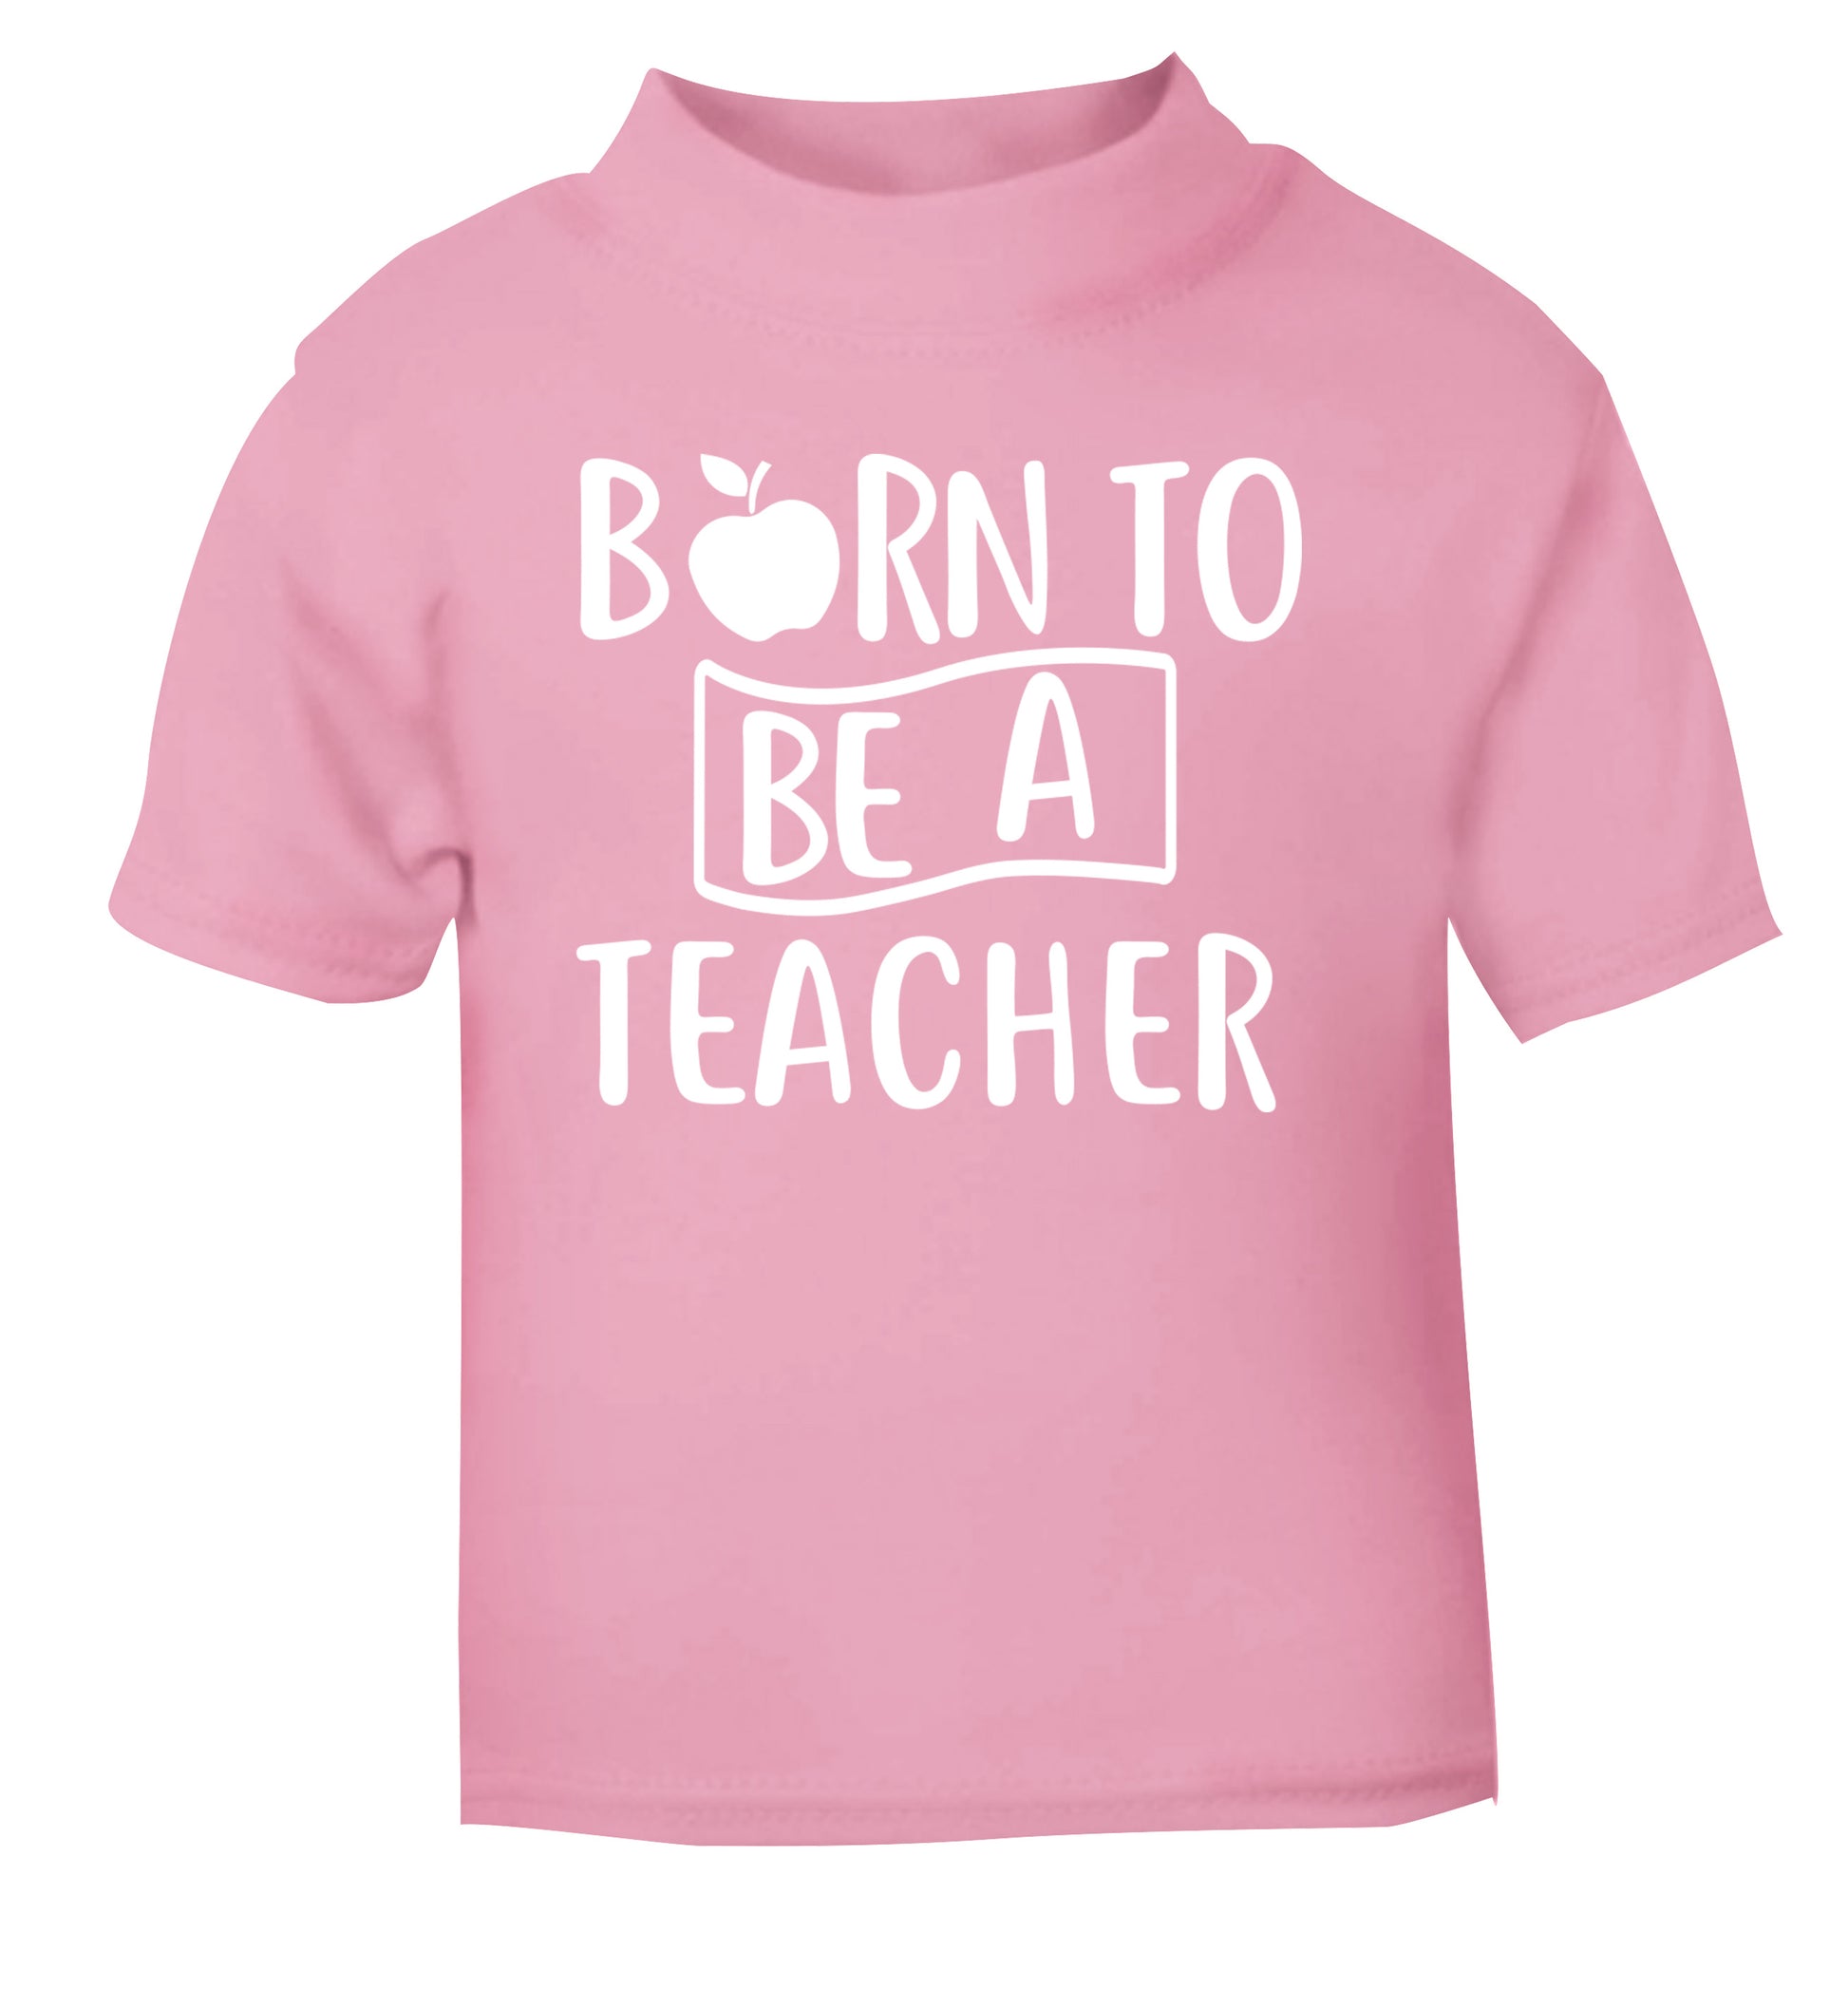 Born to be a teacher light pink Baby Toddler Tshirt 2 Years